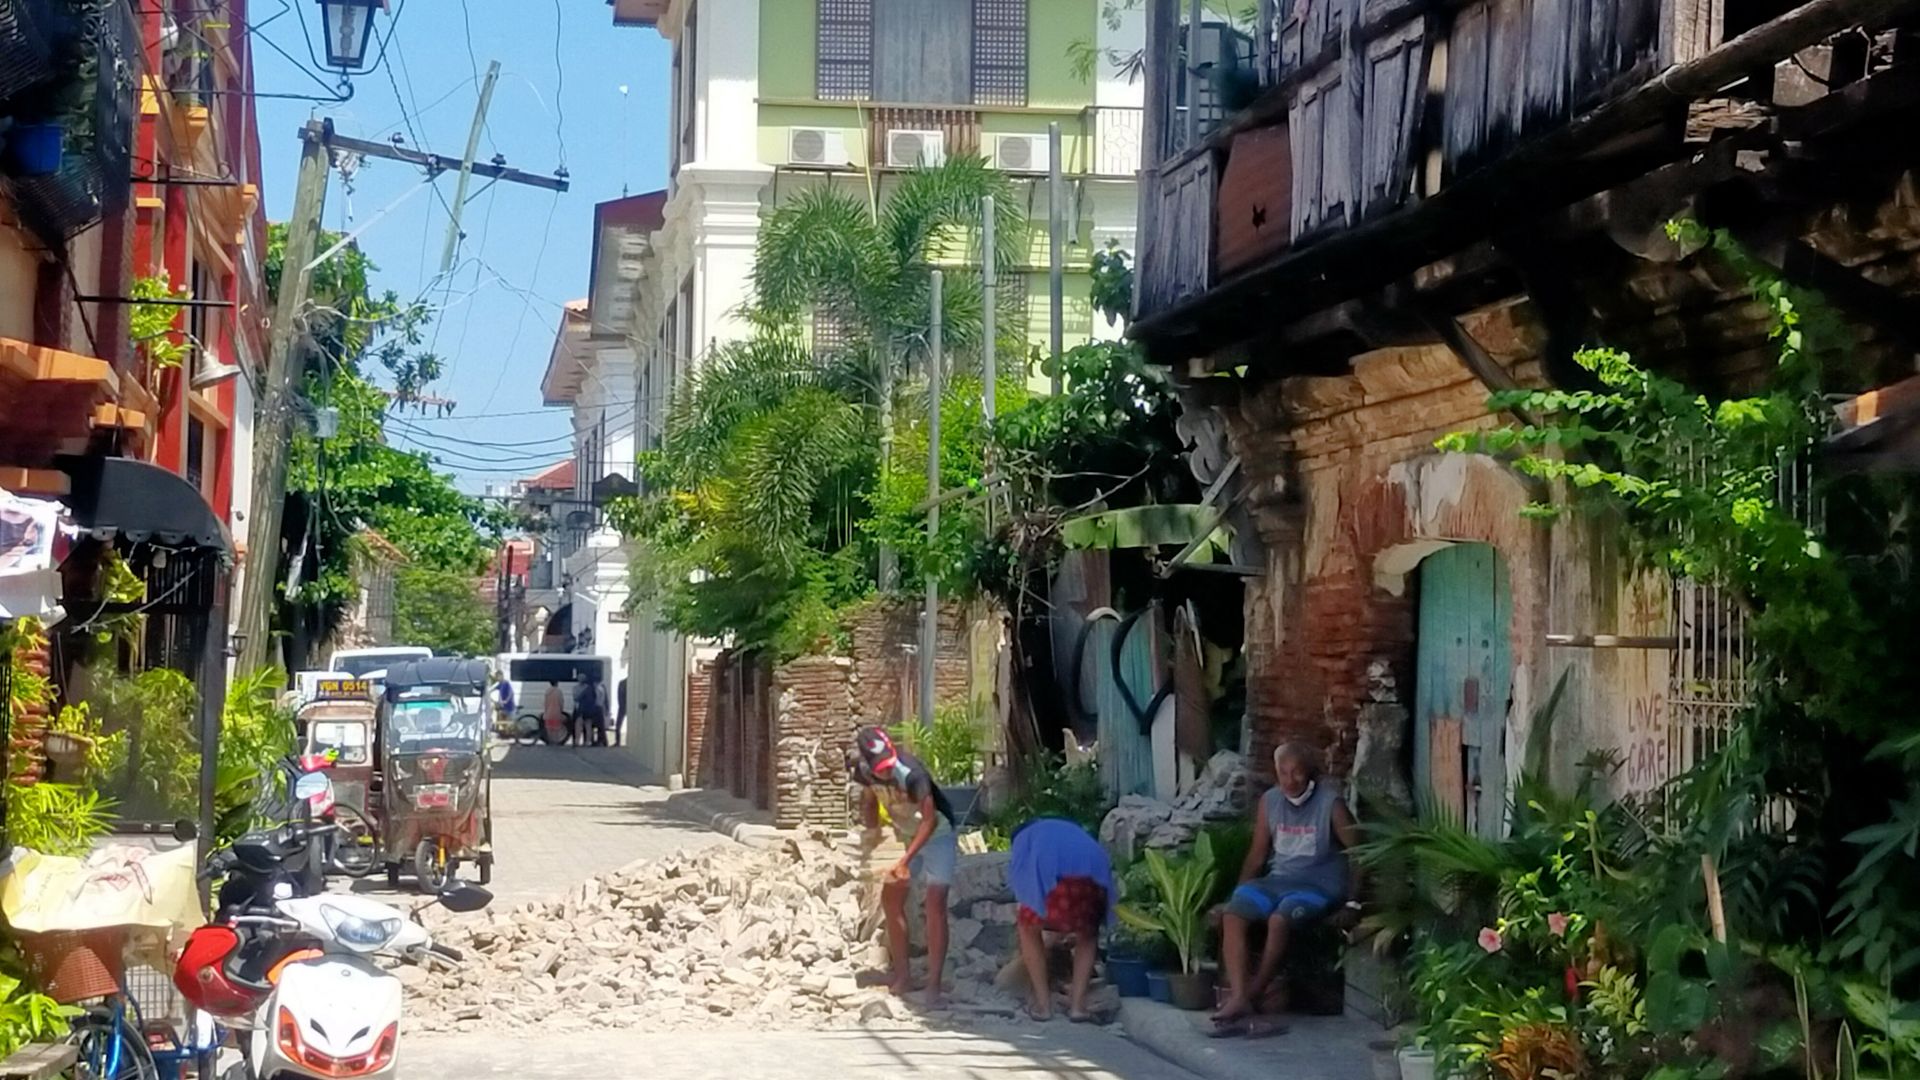 Residents try to clear up debris from an old house in Vigan city, Ilocos Sur province north of Manila on July 27.